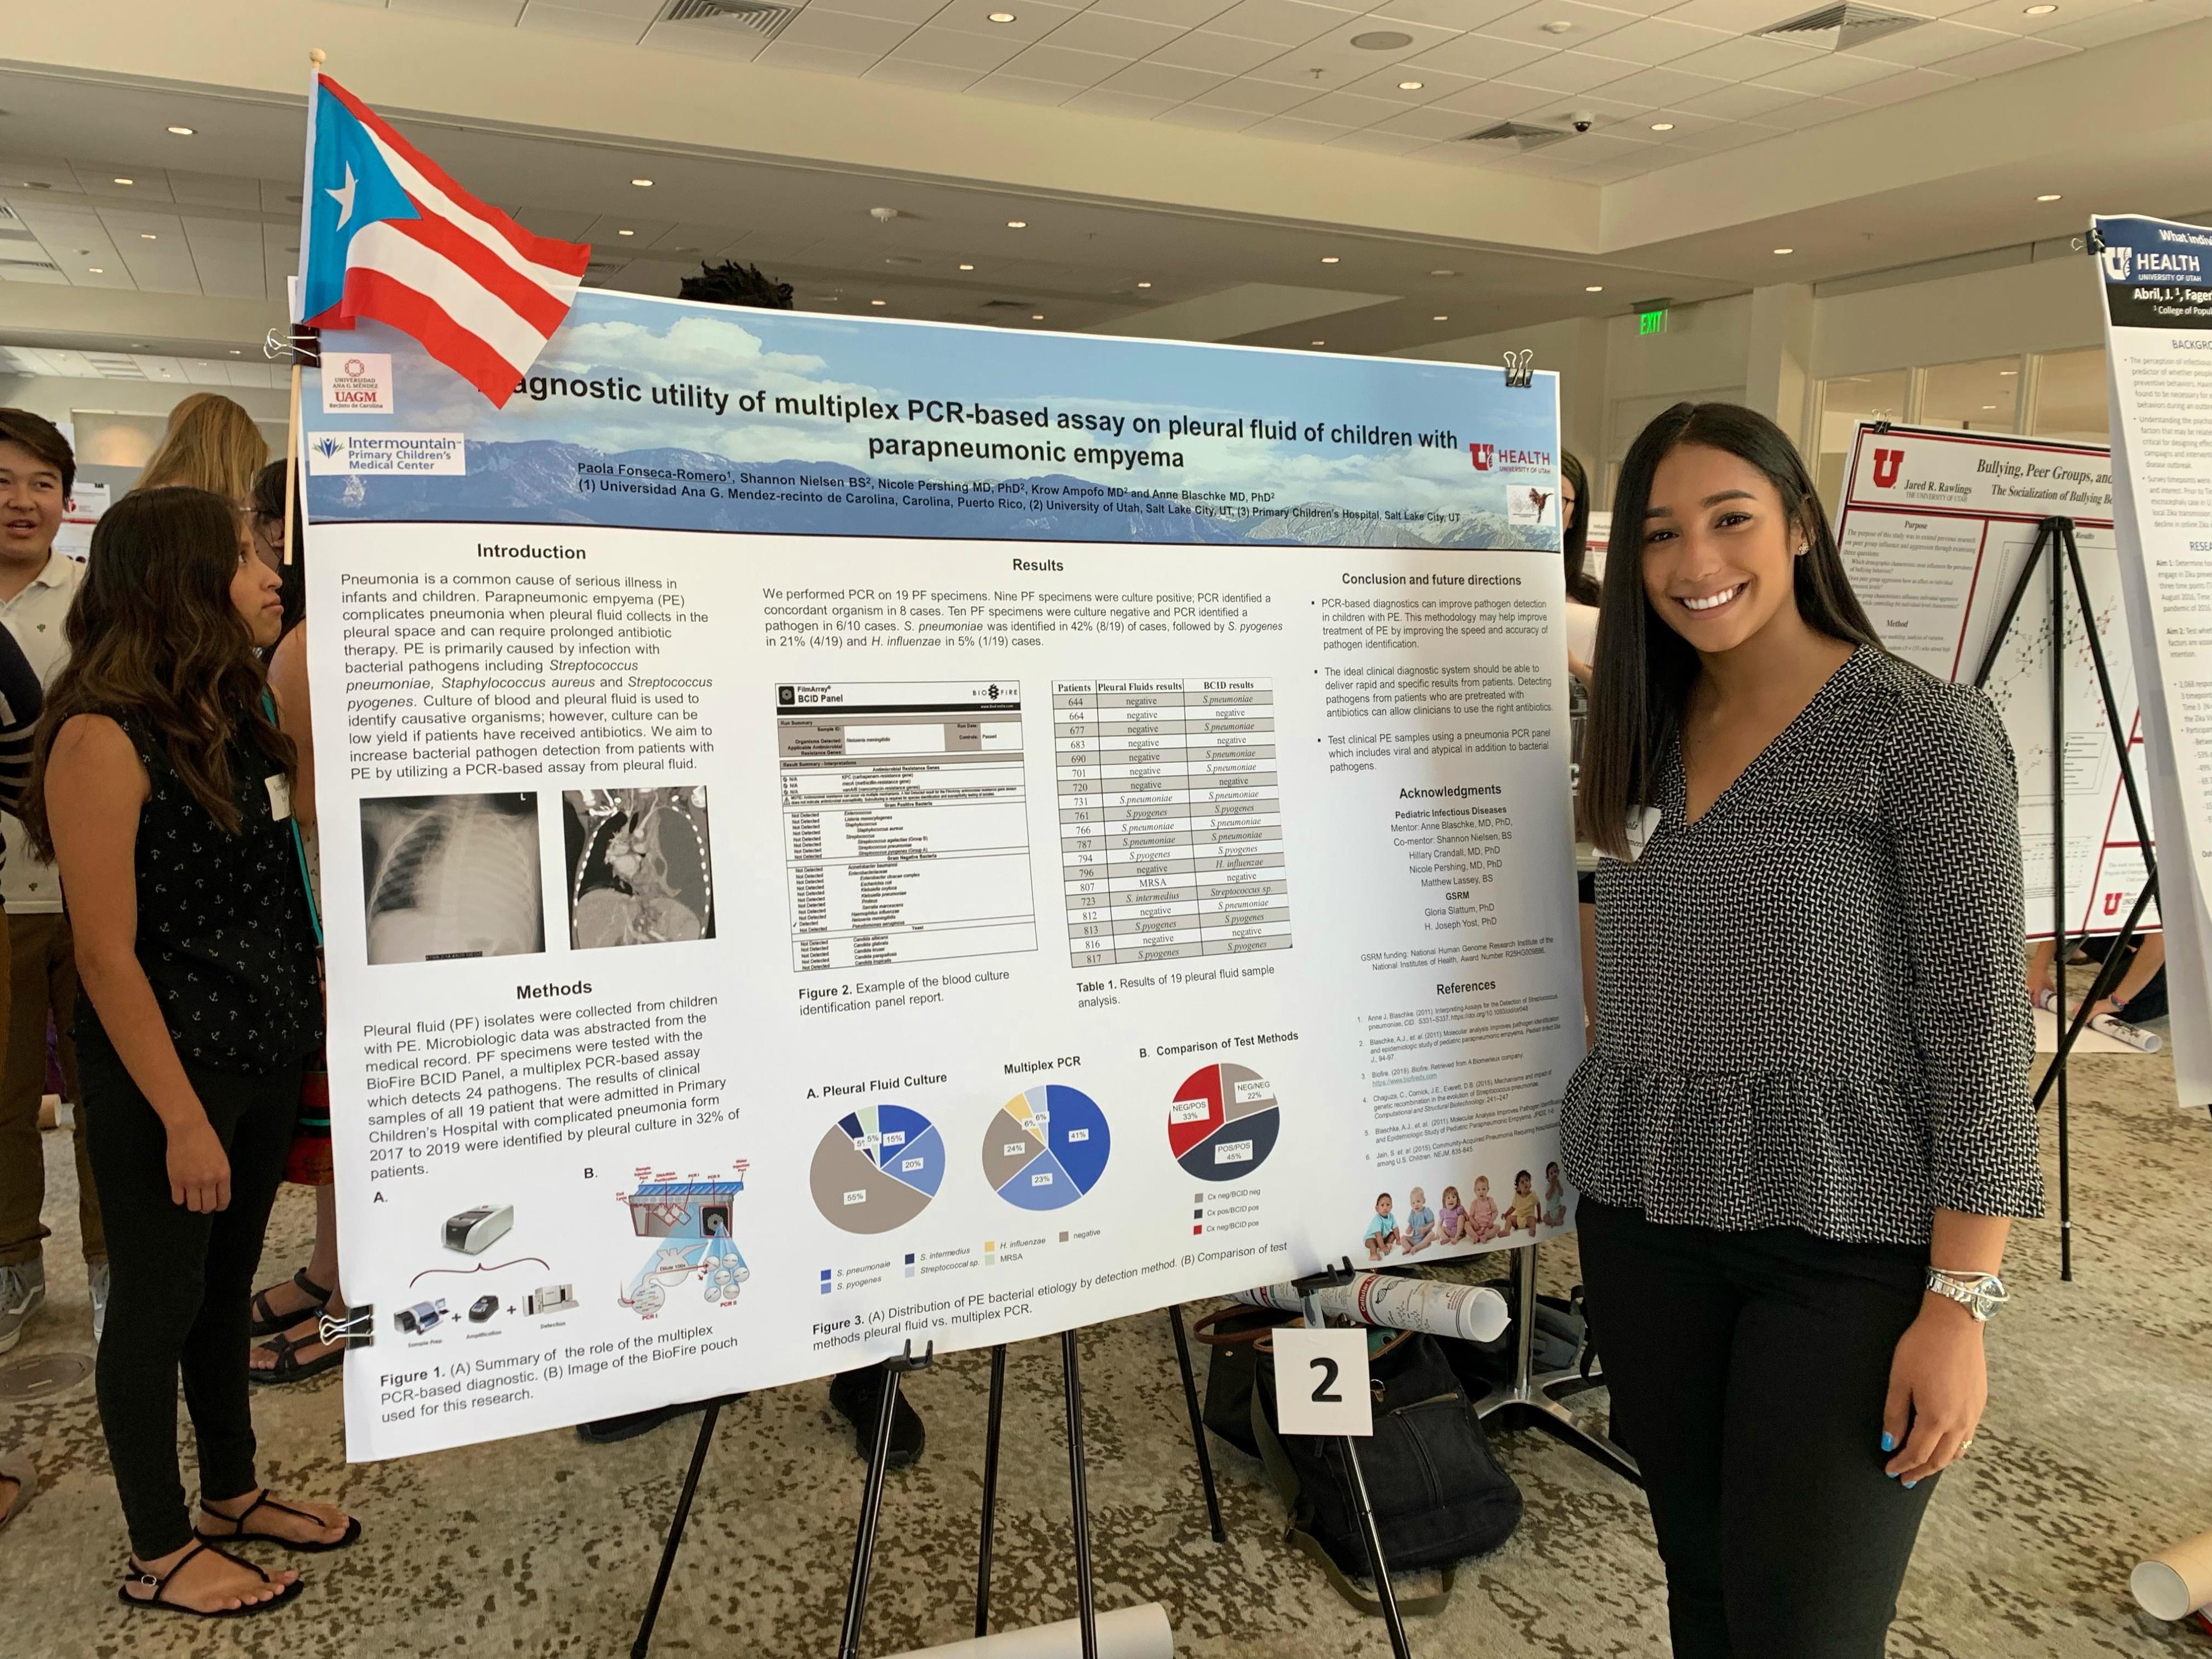 Paola Fosenca-Romero presenting GSRM research at SACNAS conference, 2019